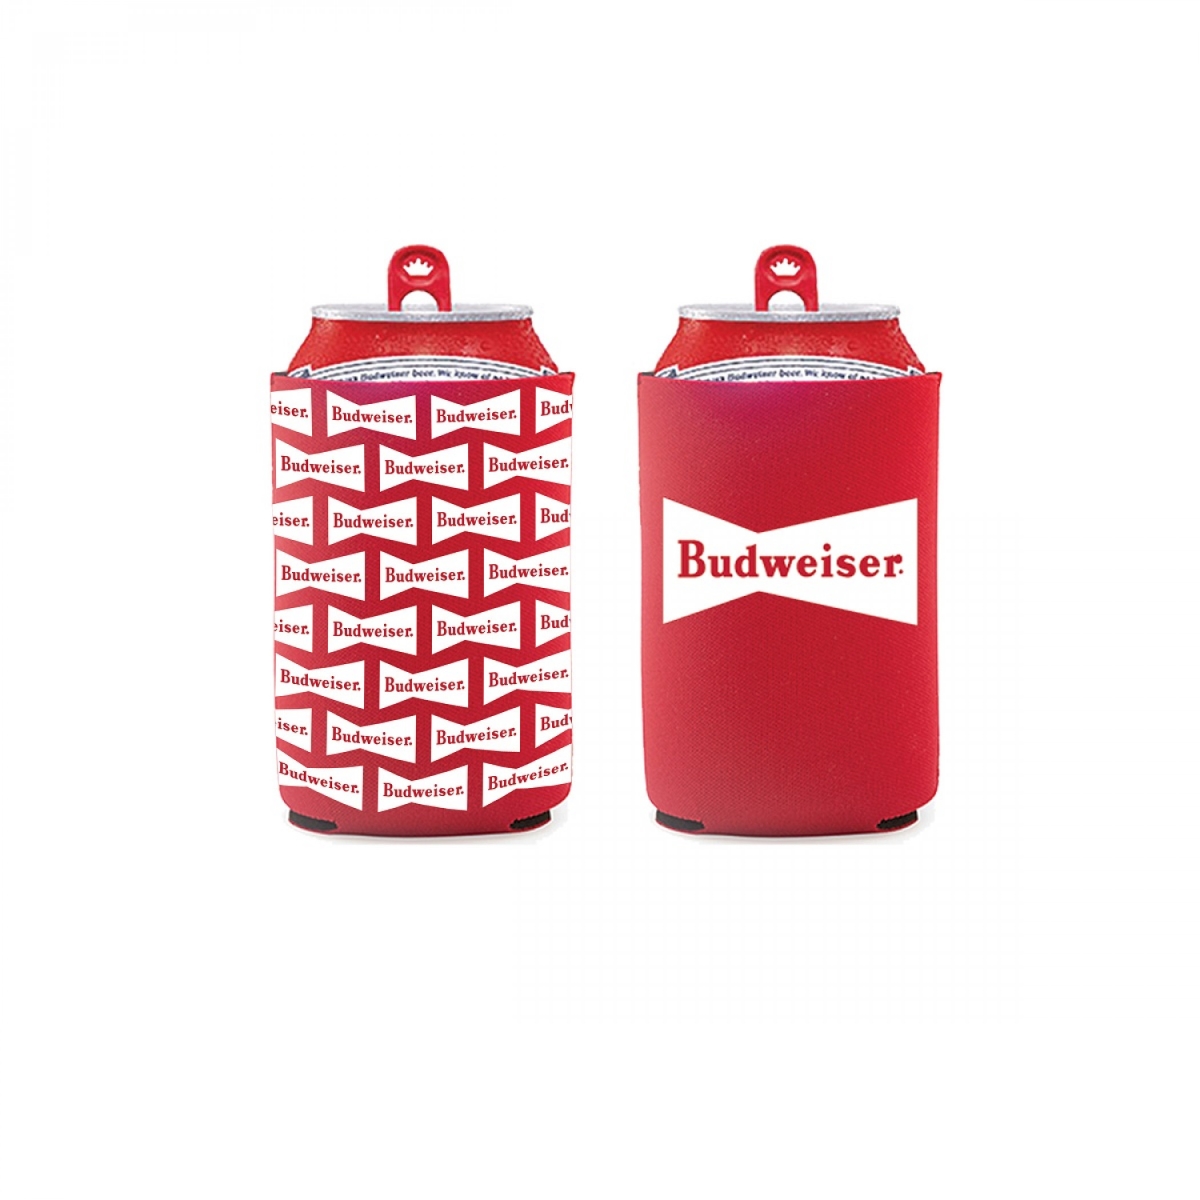 Budweiser wearyourbeer budweiser 2-pack of neoprene can coolers, redwhite